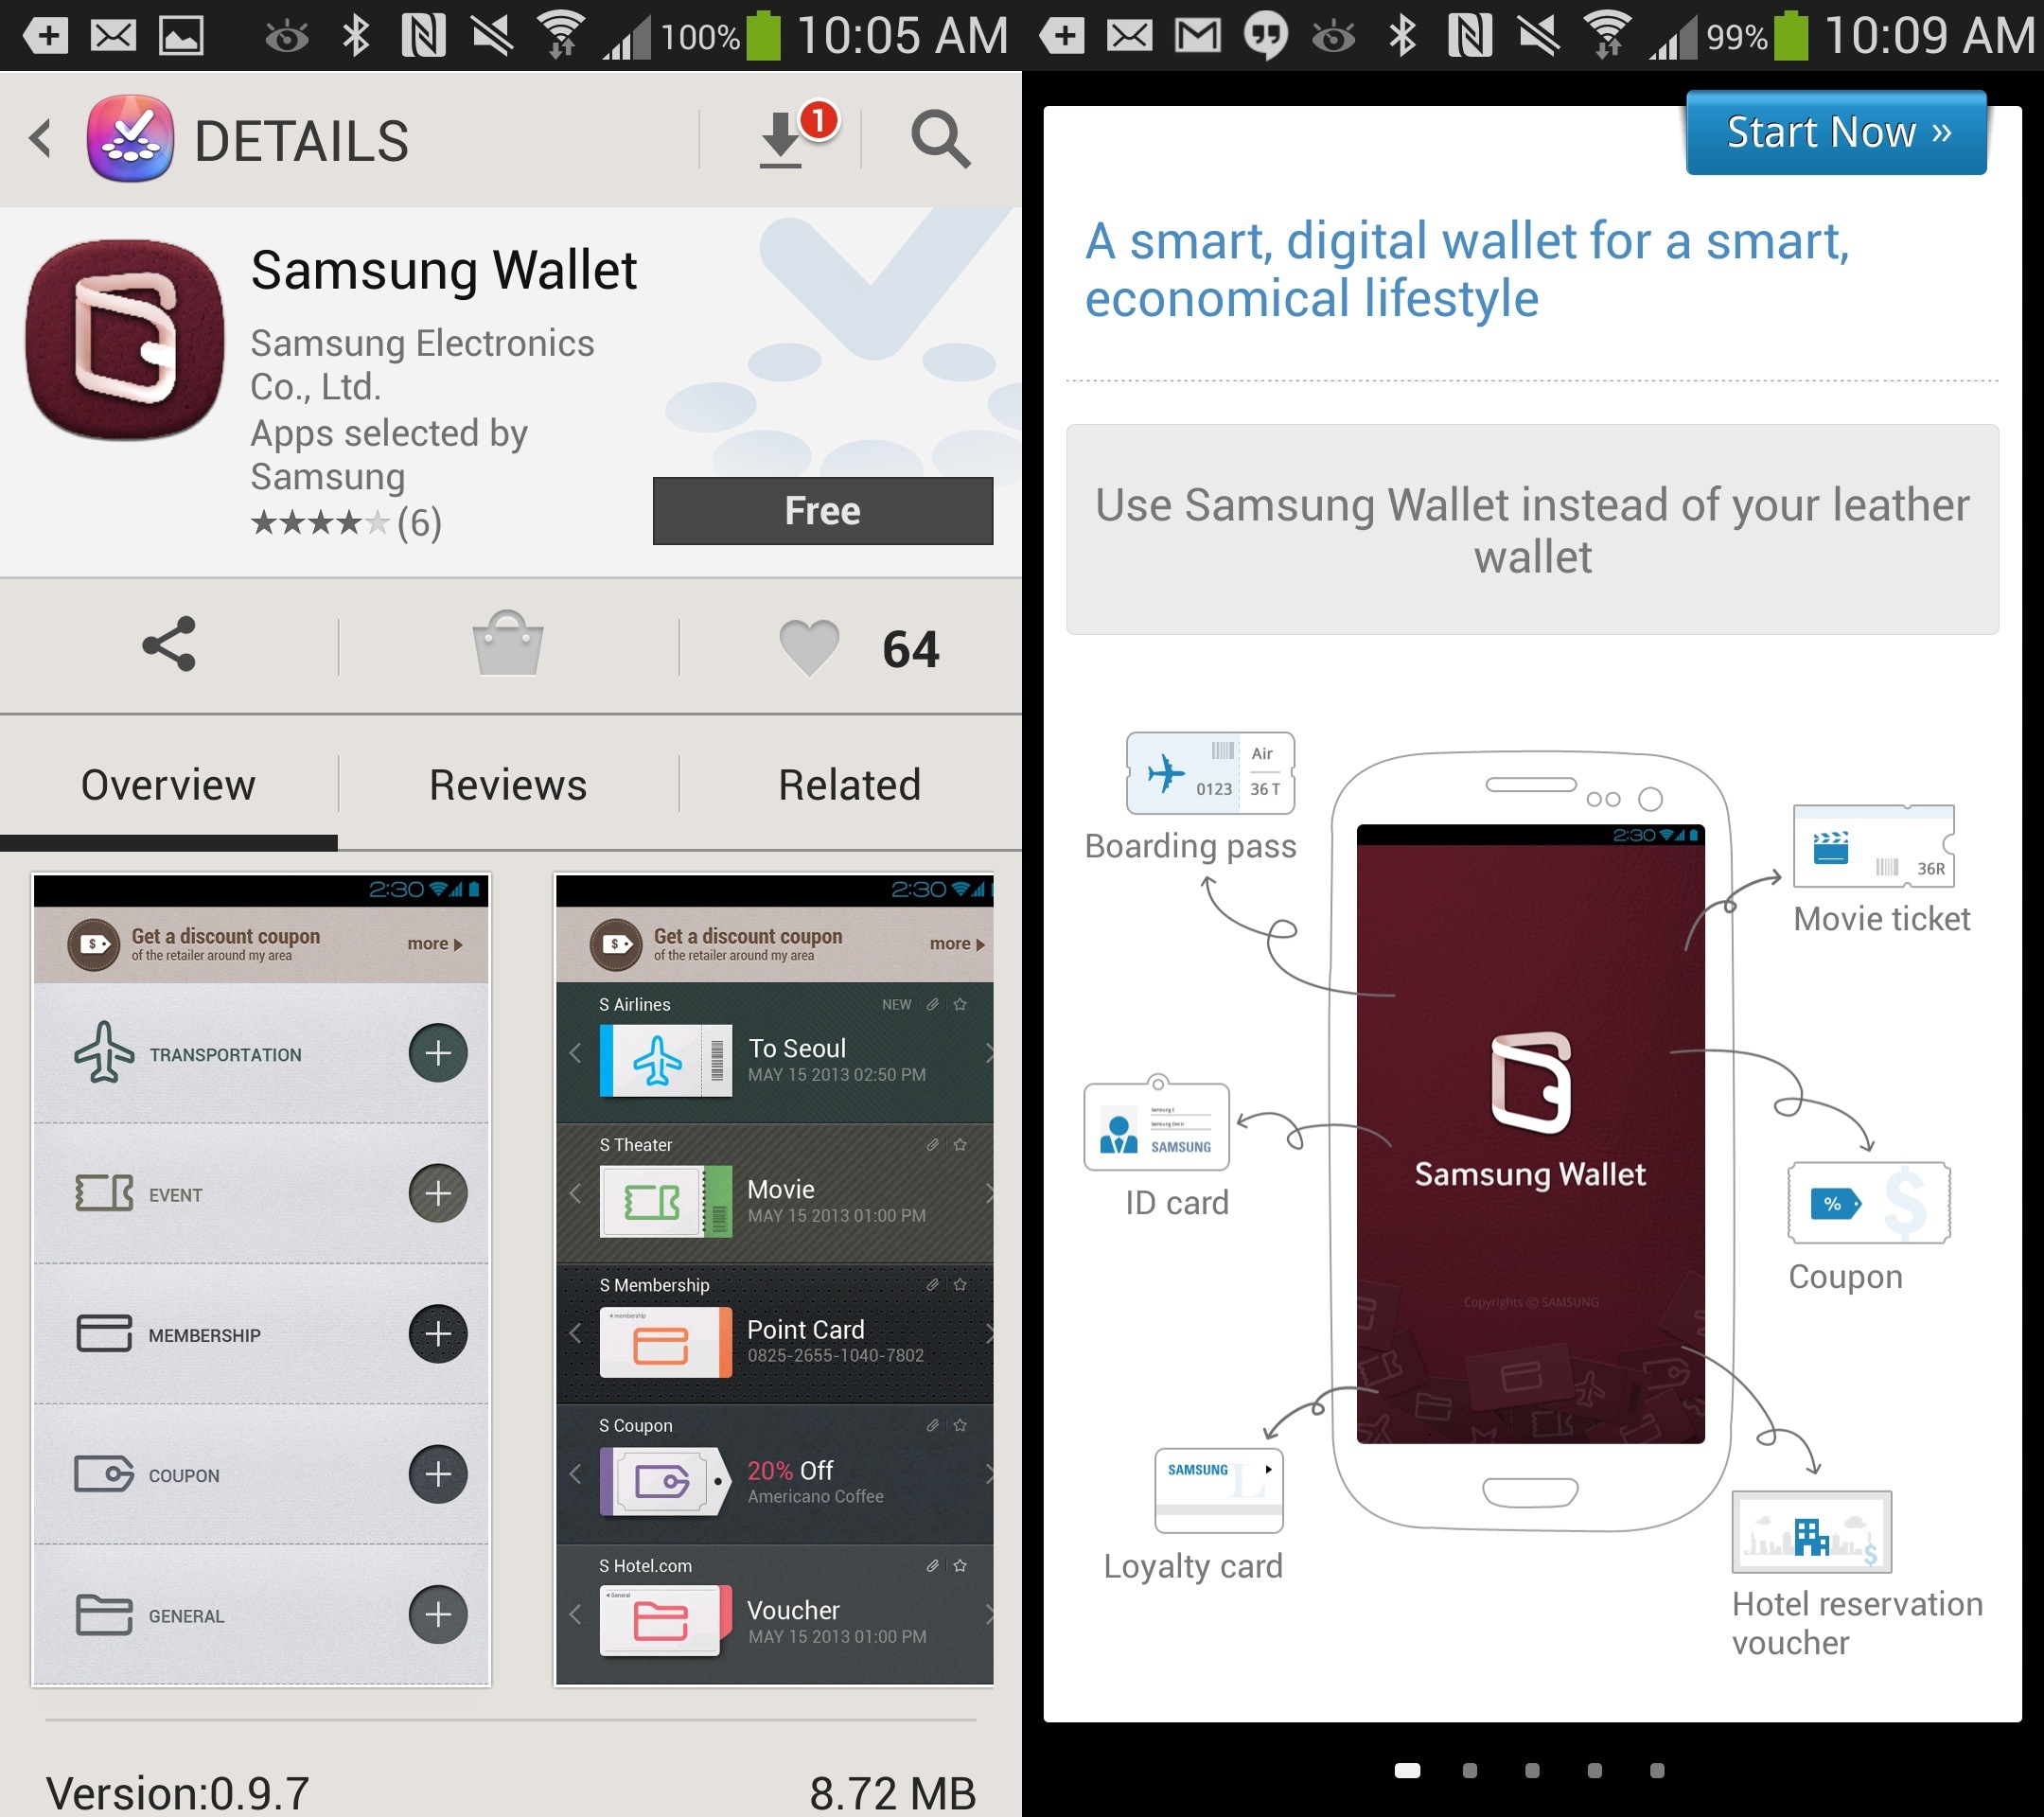 Search for Samsung Wallet in the Samsung App store to get the Samsung Wallet on compatible Galaxy devices in the U.S.